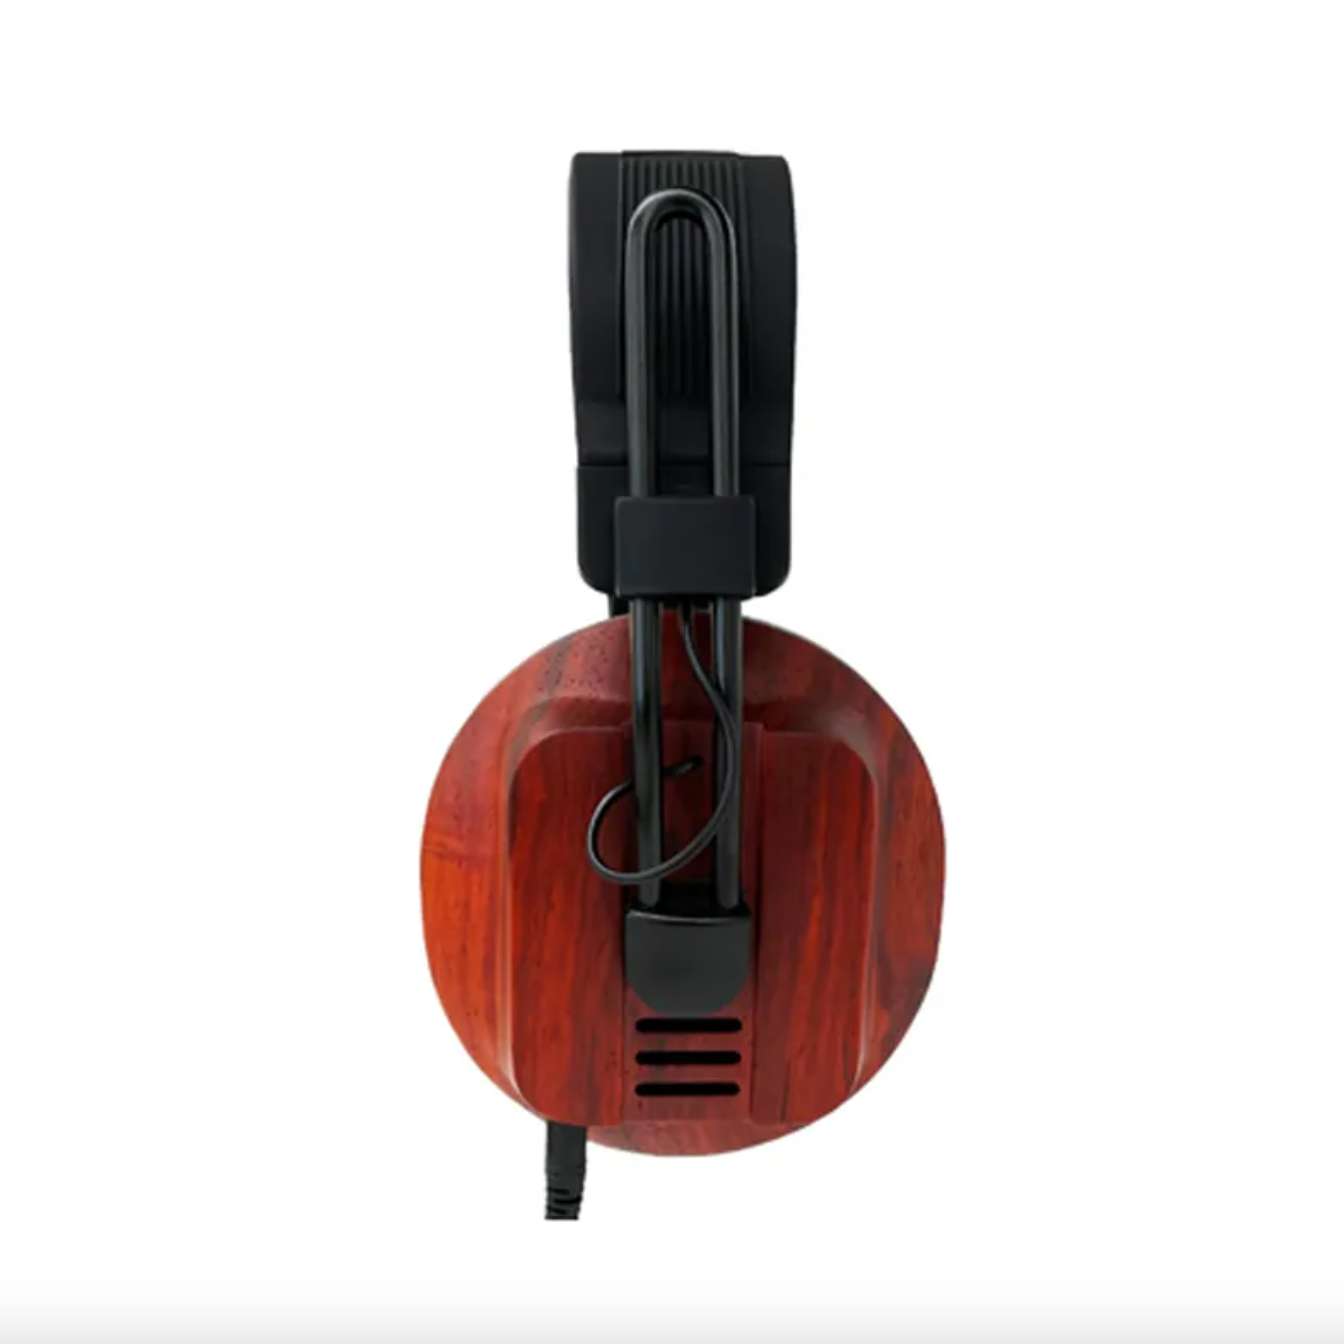 Fostex T60RP 50th Anniversary Limited Edition Wooden Shell Planar Diaphragm Headphones